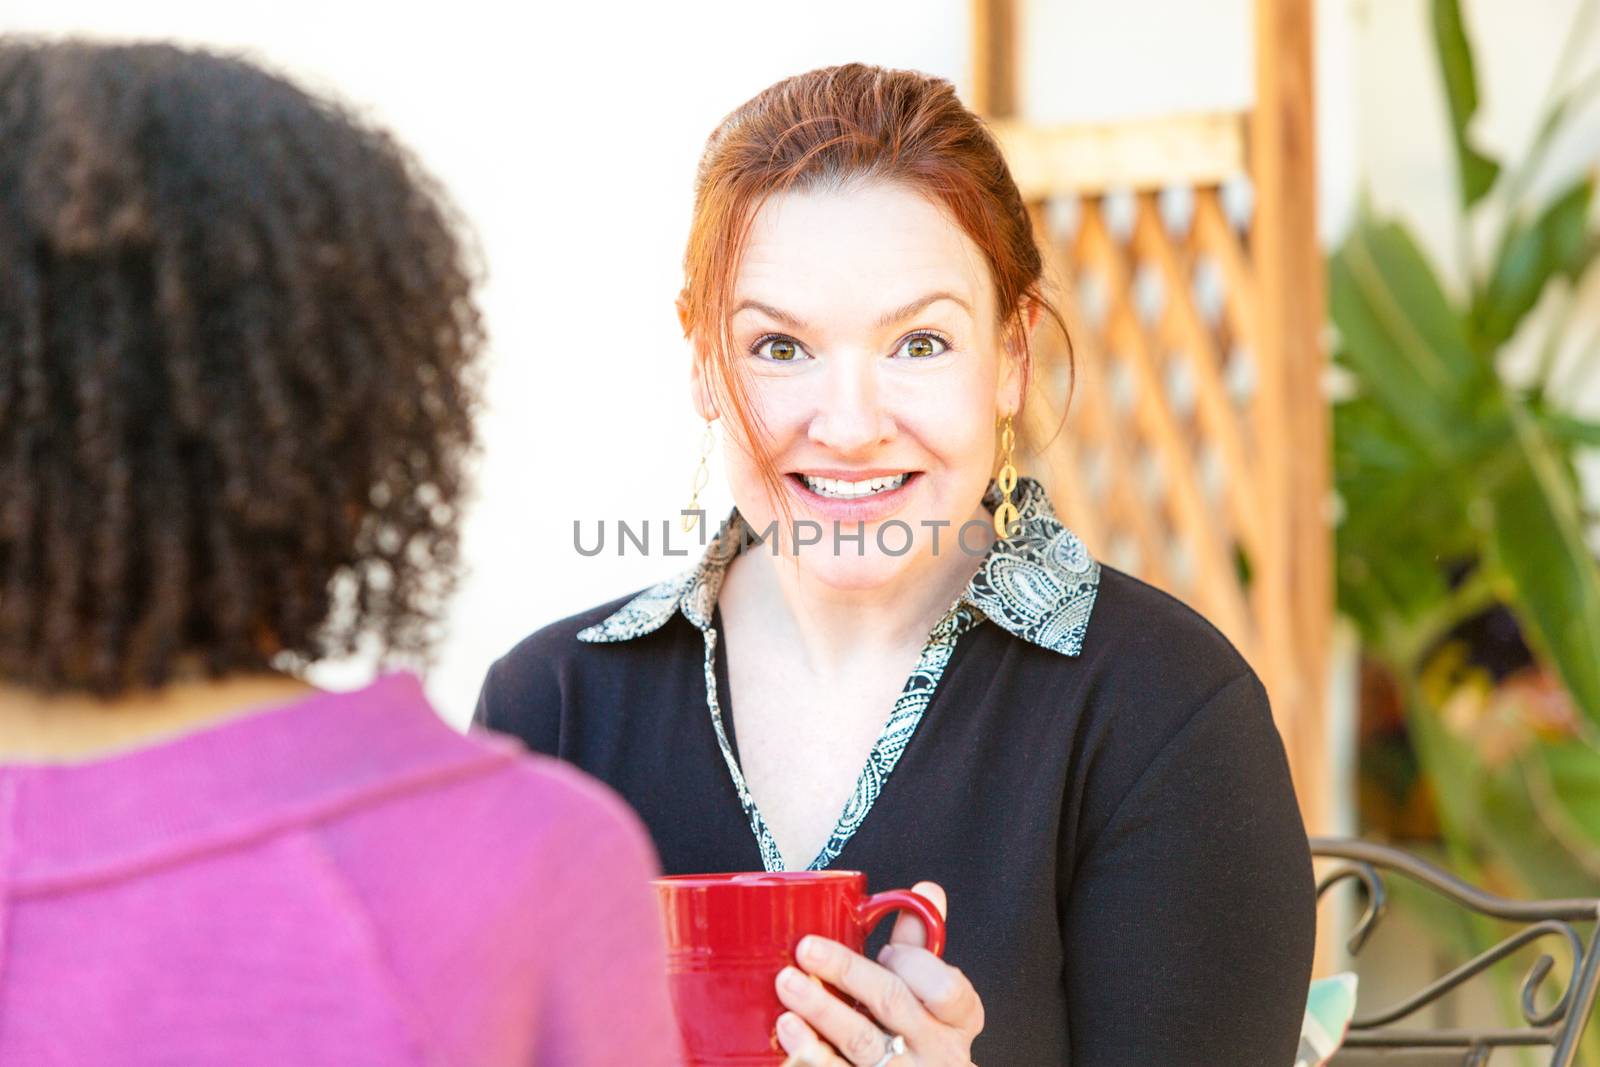 Caucasian woman with joyful expression seated with friend in cafe